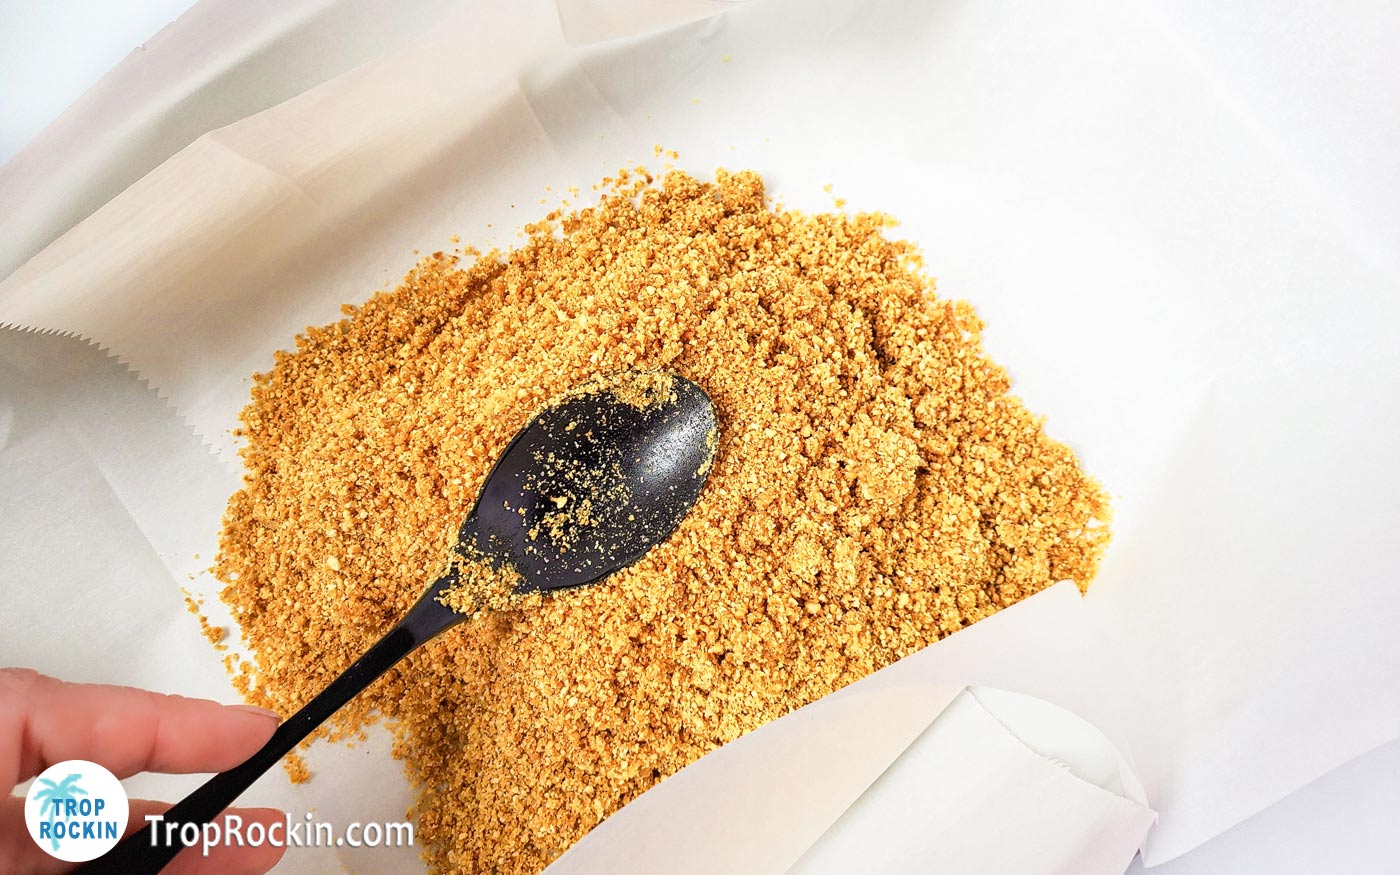 Pressing graham cracker crumbs with a spoon in a prepared baking pan lined with parchment paper.